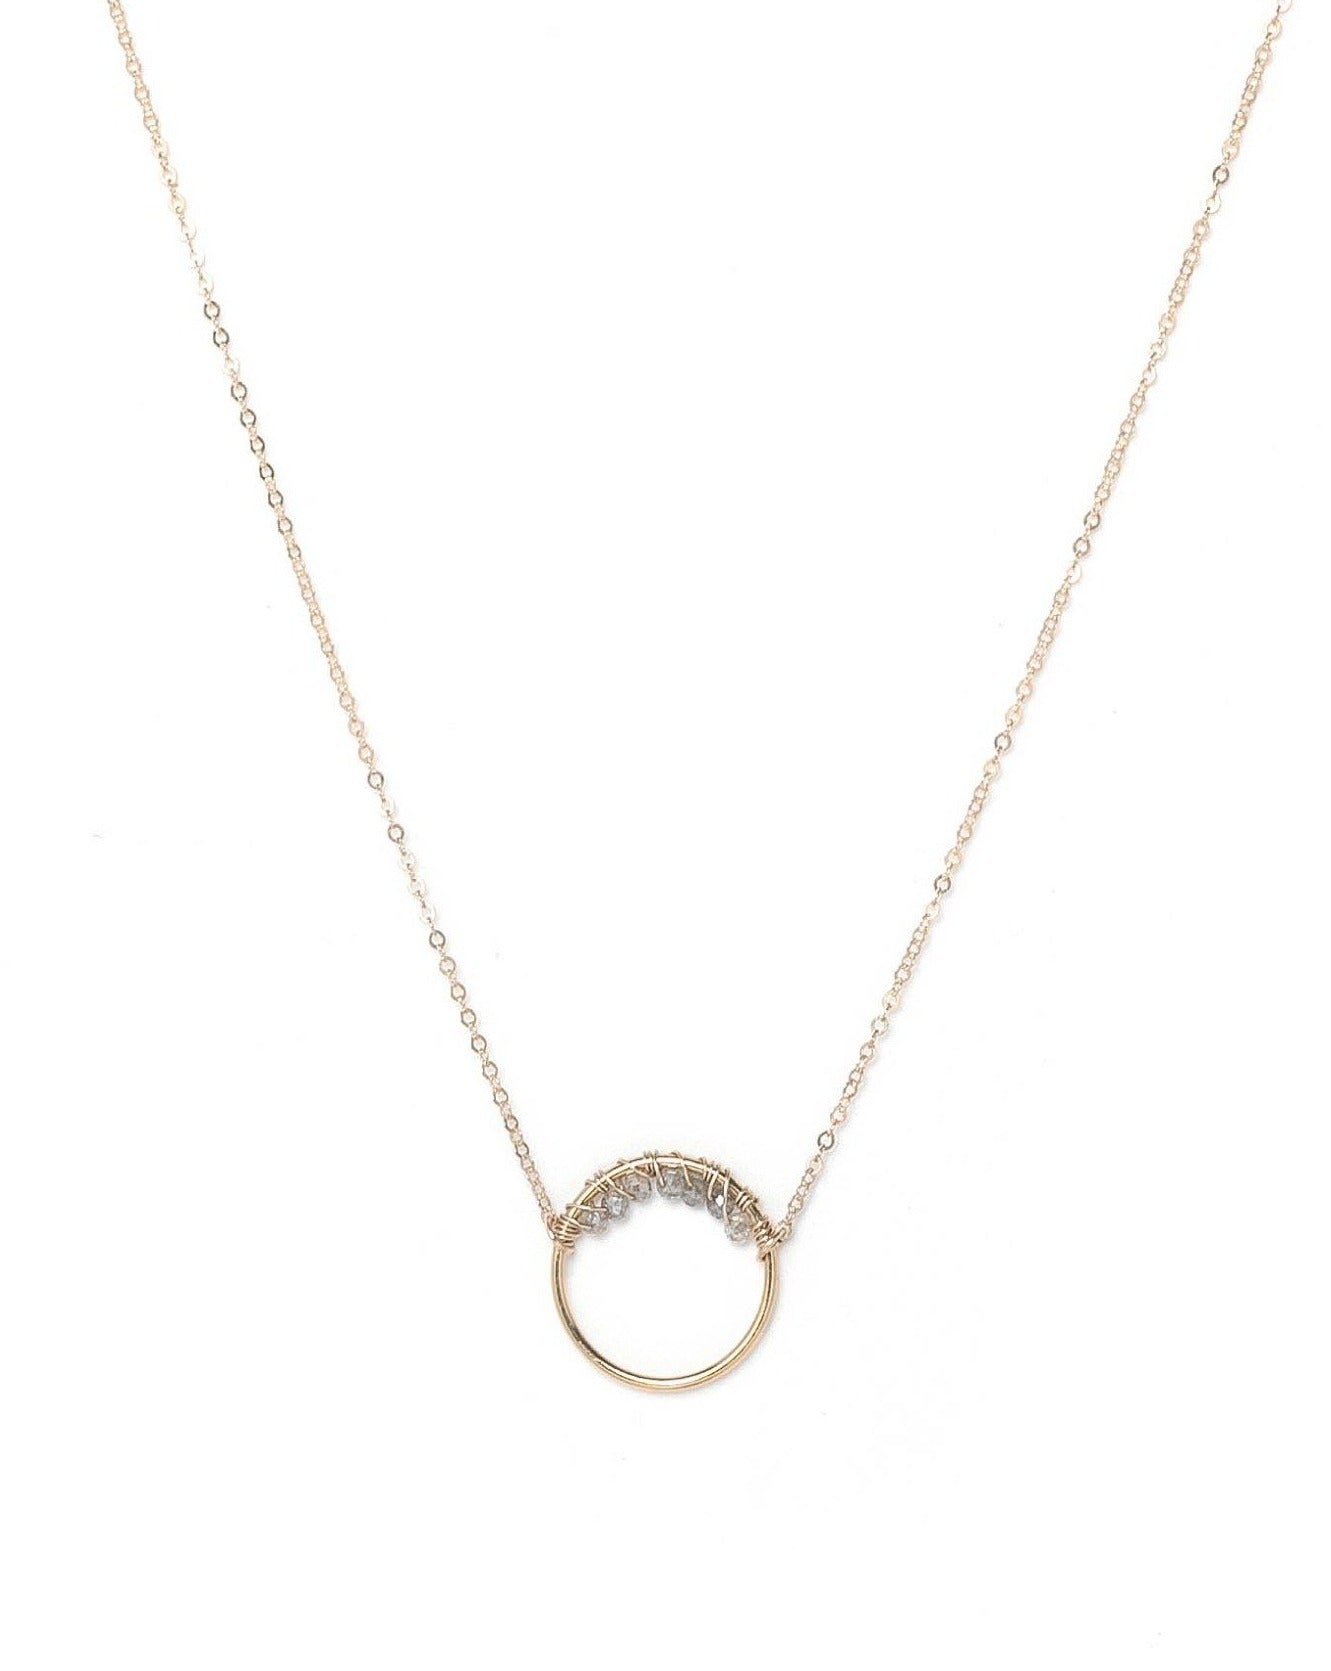 Curra Necklace by KOZAKH. A 16 to 18 inch adjustable length necklace in 14K Gold Filled, featuring a ring with 2mm faceted round Labradorite gems.